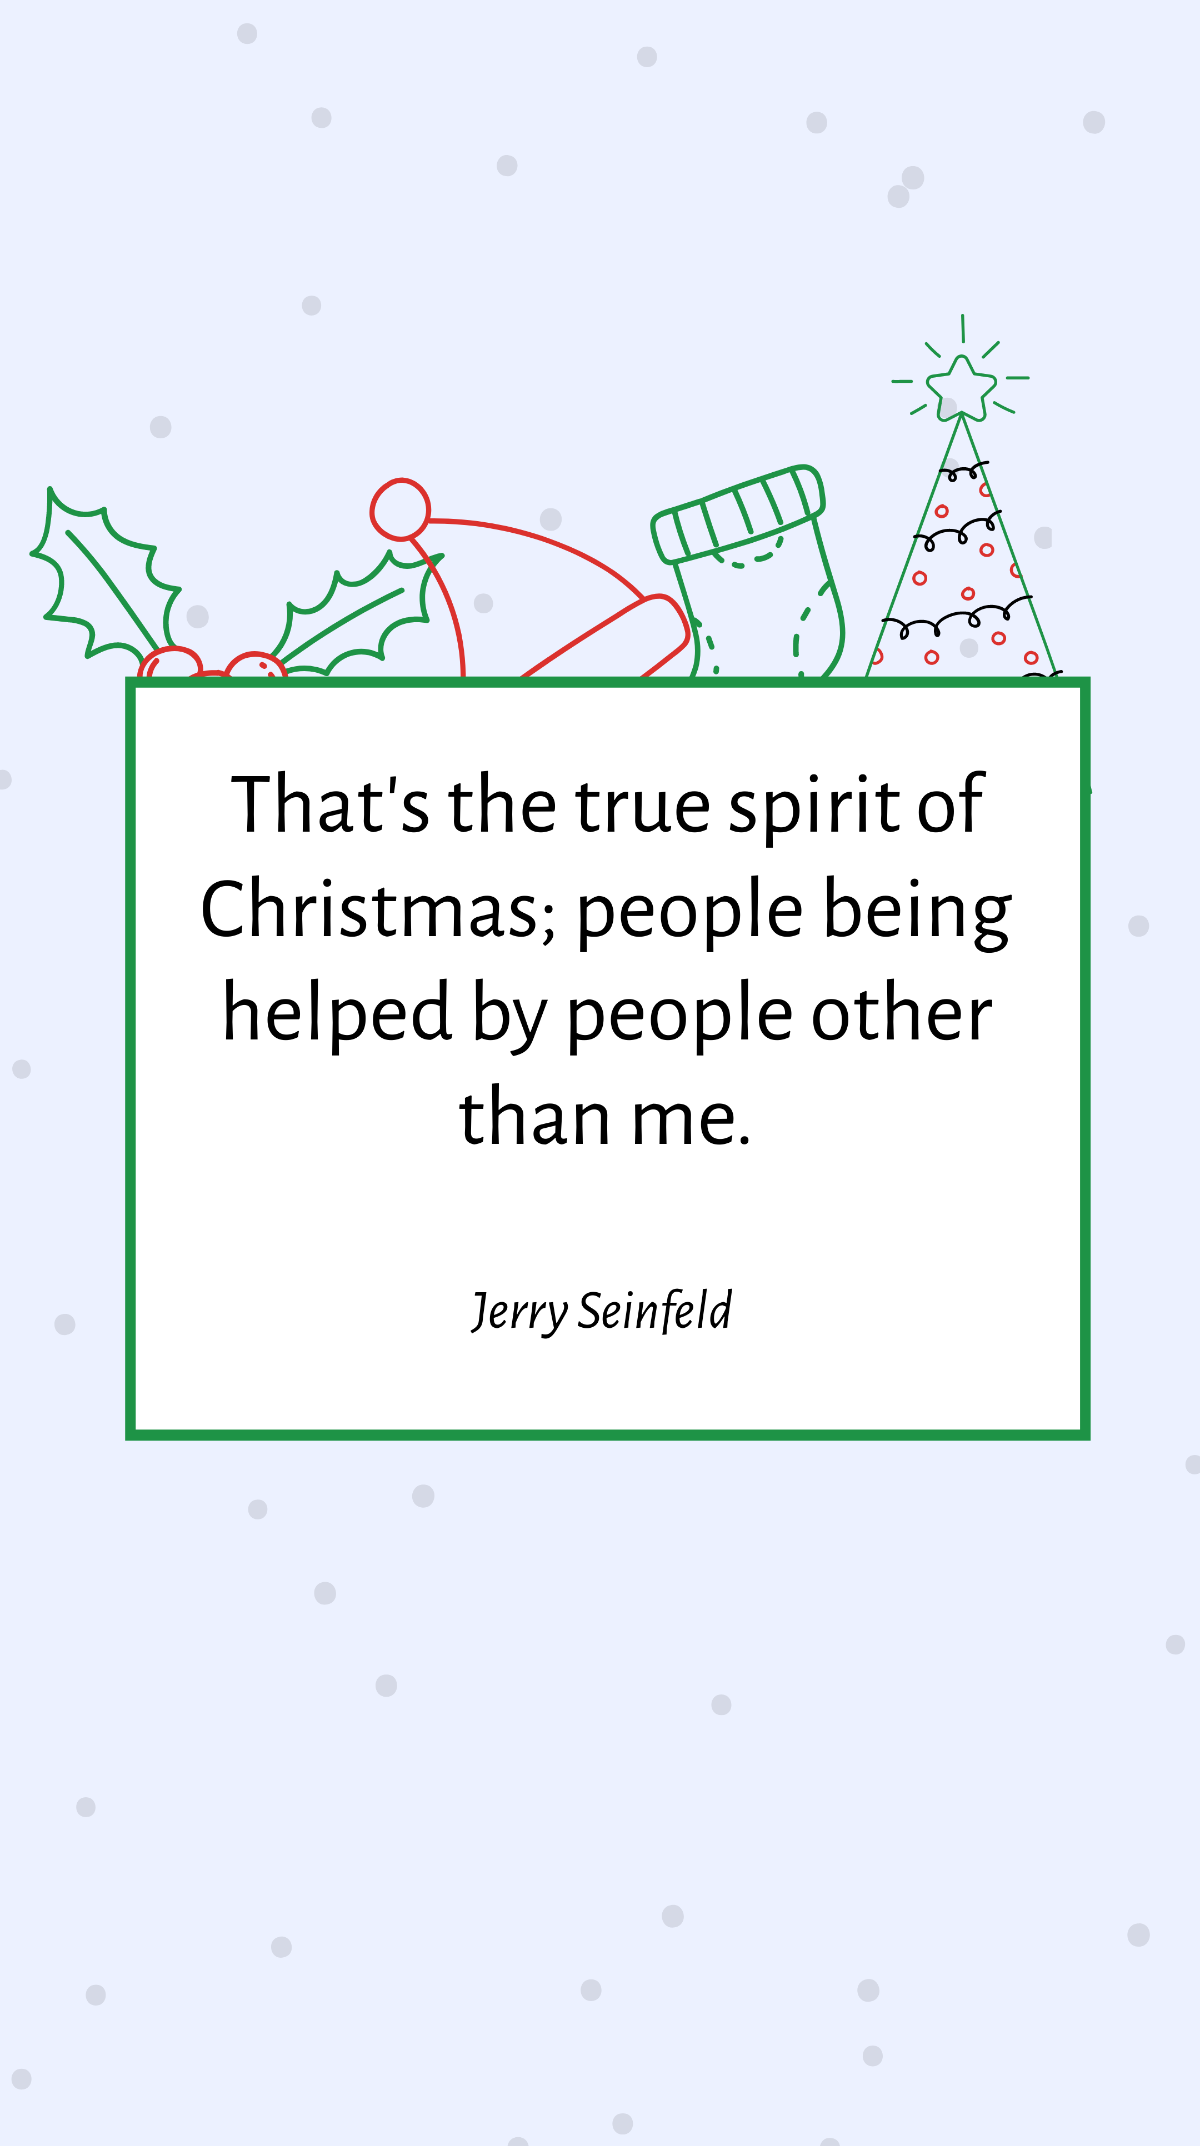 Jerry Seinfeld - That's the true spirit of Christmas; people being helped by people other than me. Template